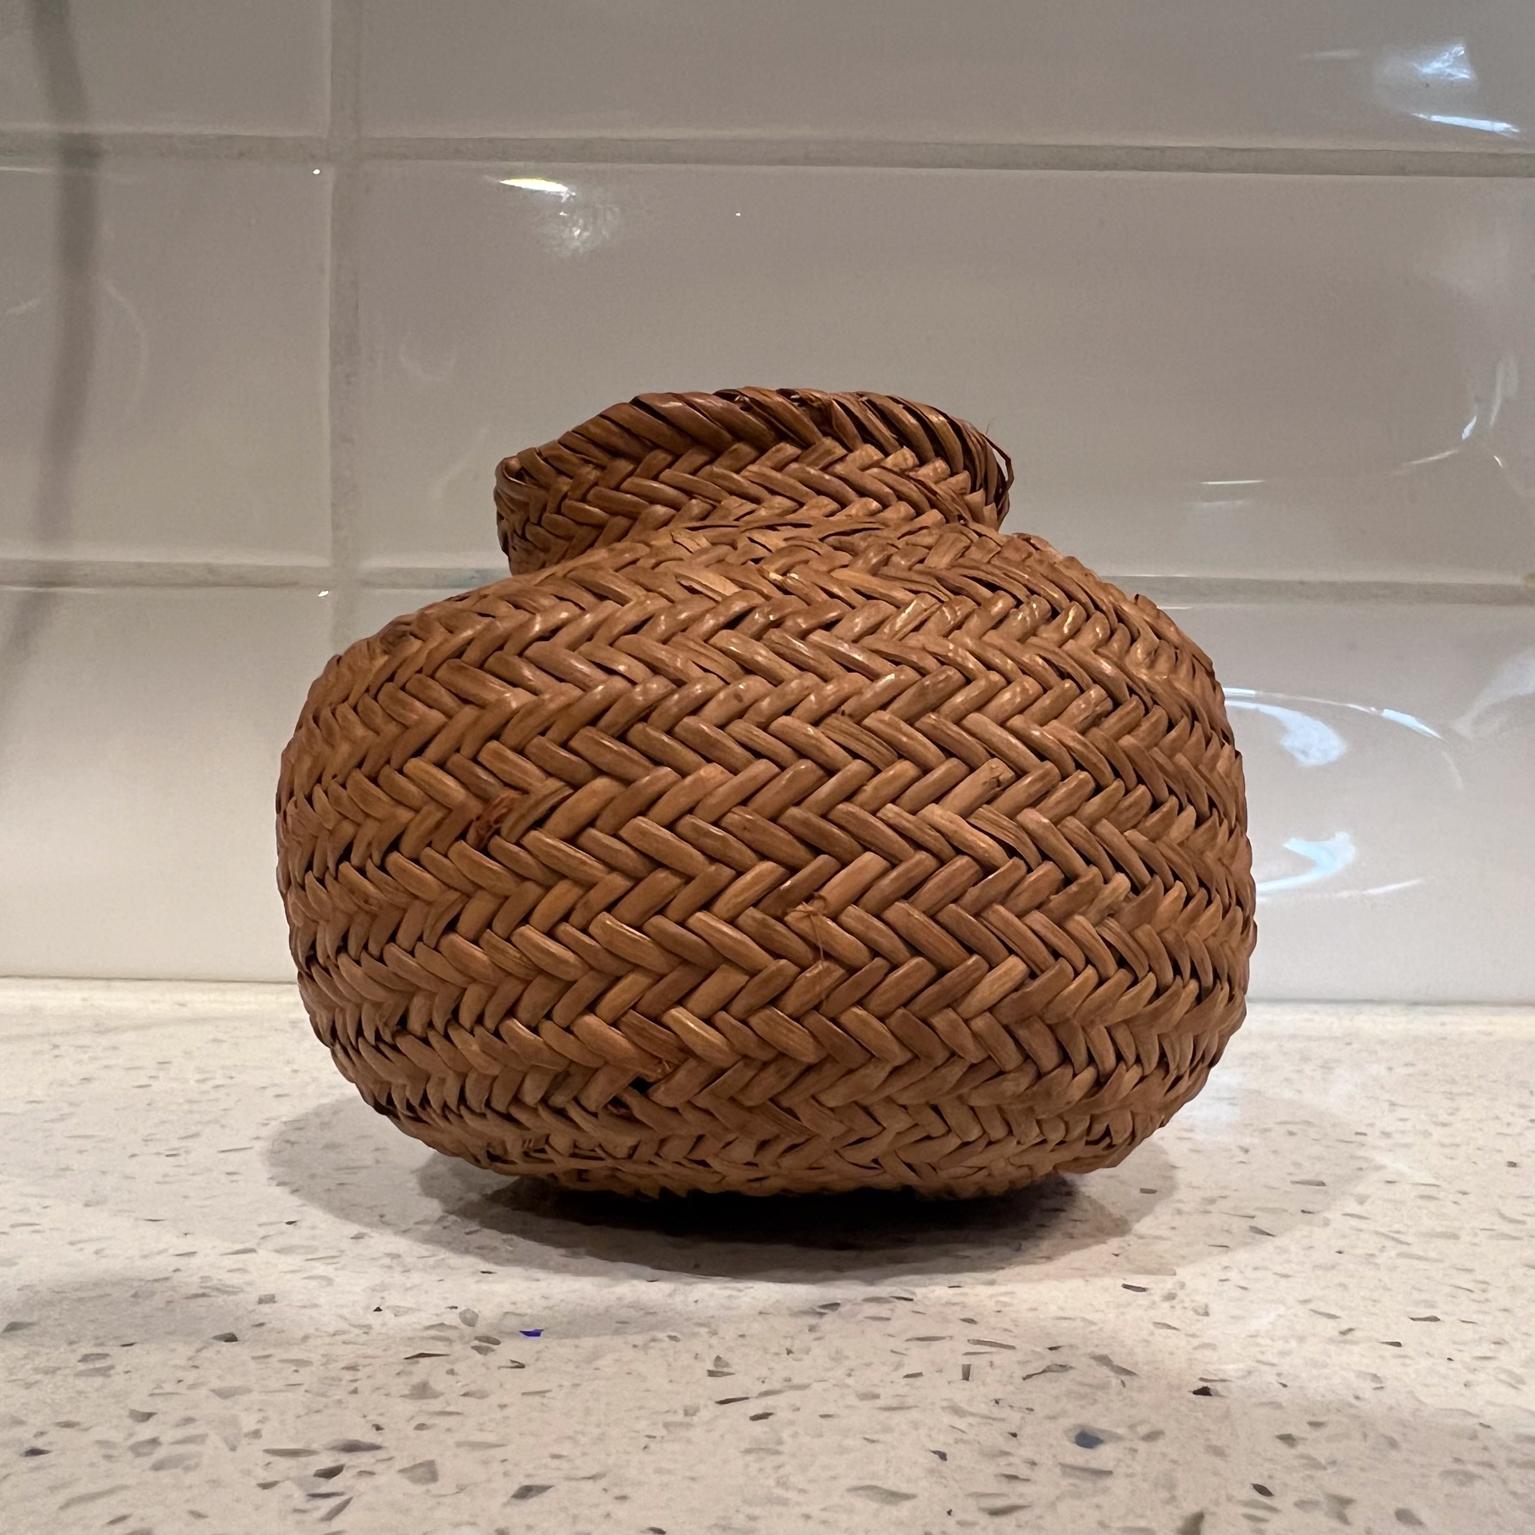 Small Handmade Basket Handcrafted Natural Woven Fiber
4 diameter x 2.88 h
Preowned vintage unrestored condition, please see images provided.